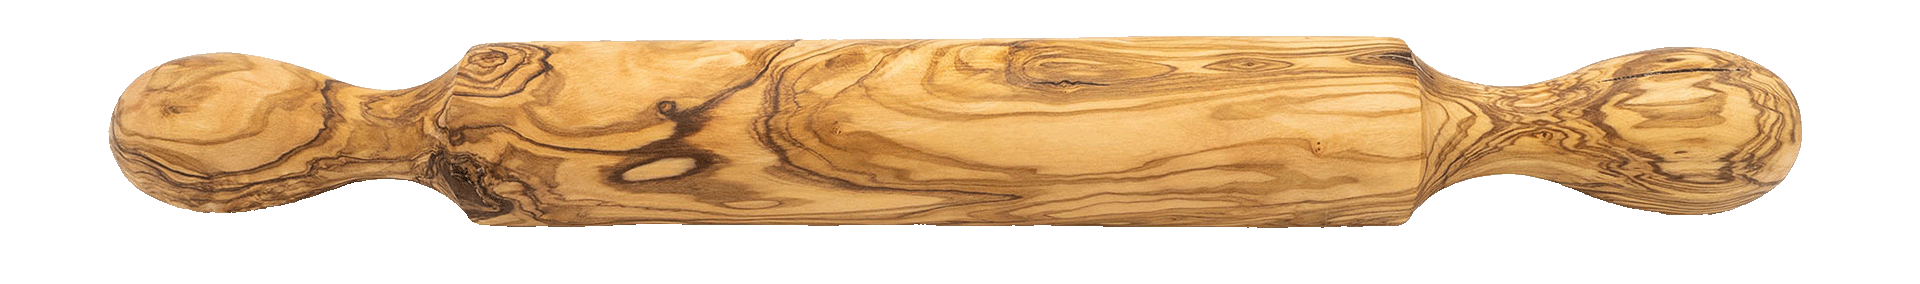 olivewood rolling pin